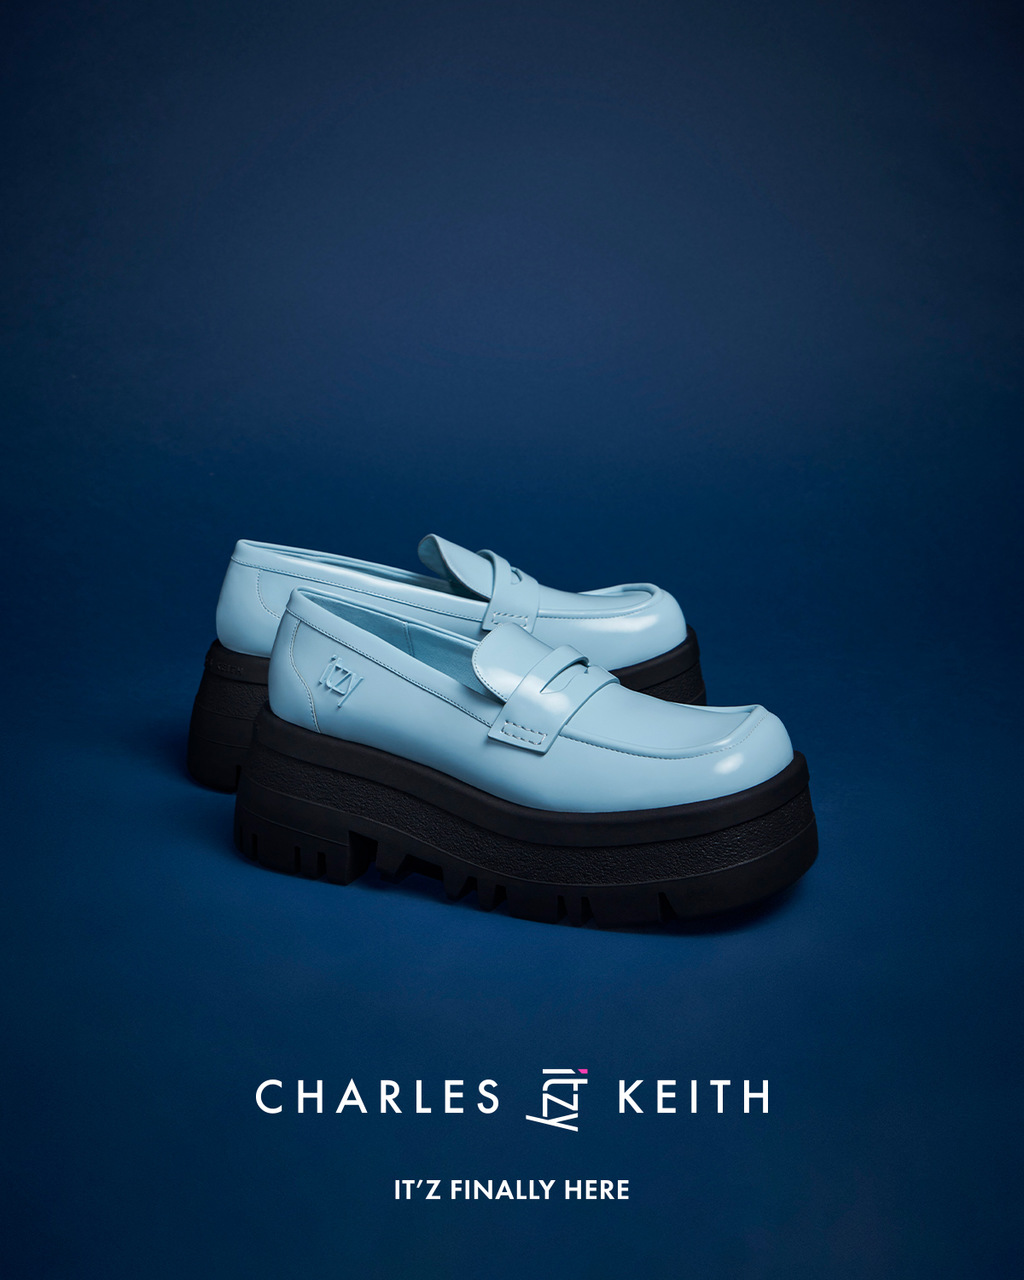 ITZY x Charles & Keith: ITZ MINE Capsule Collection